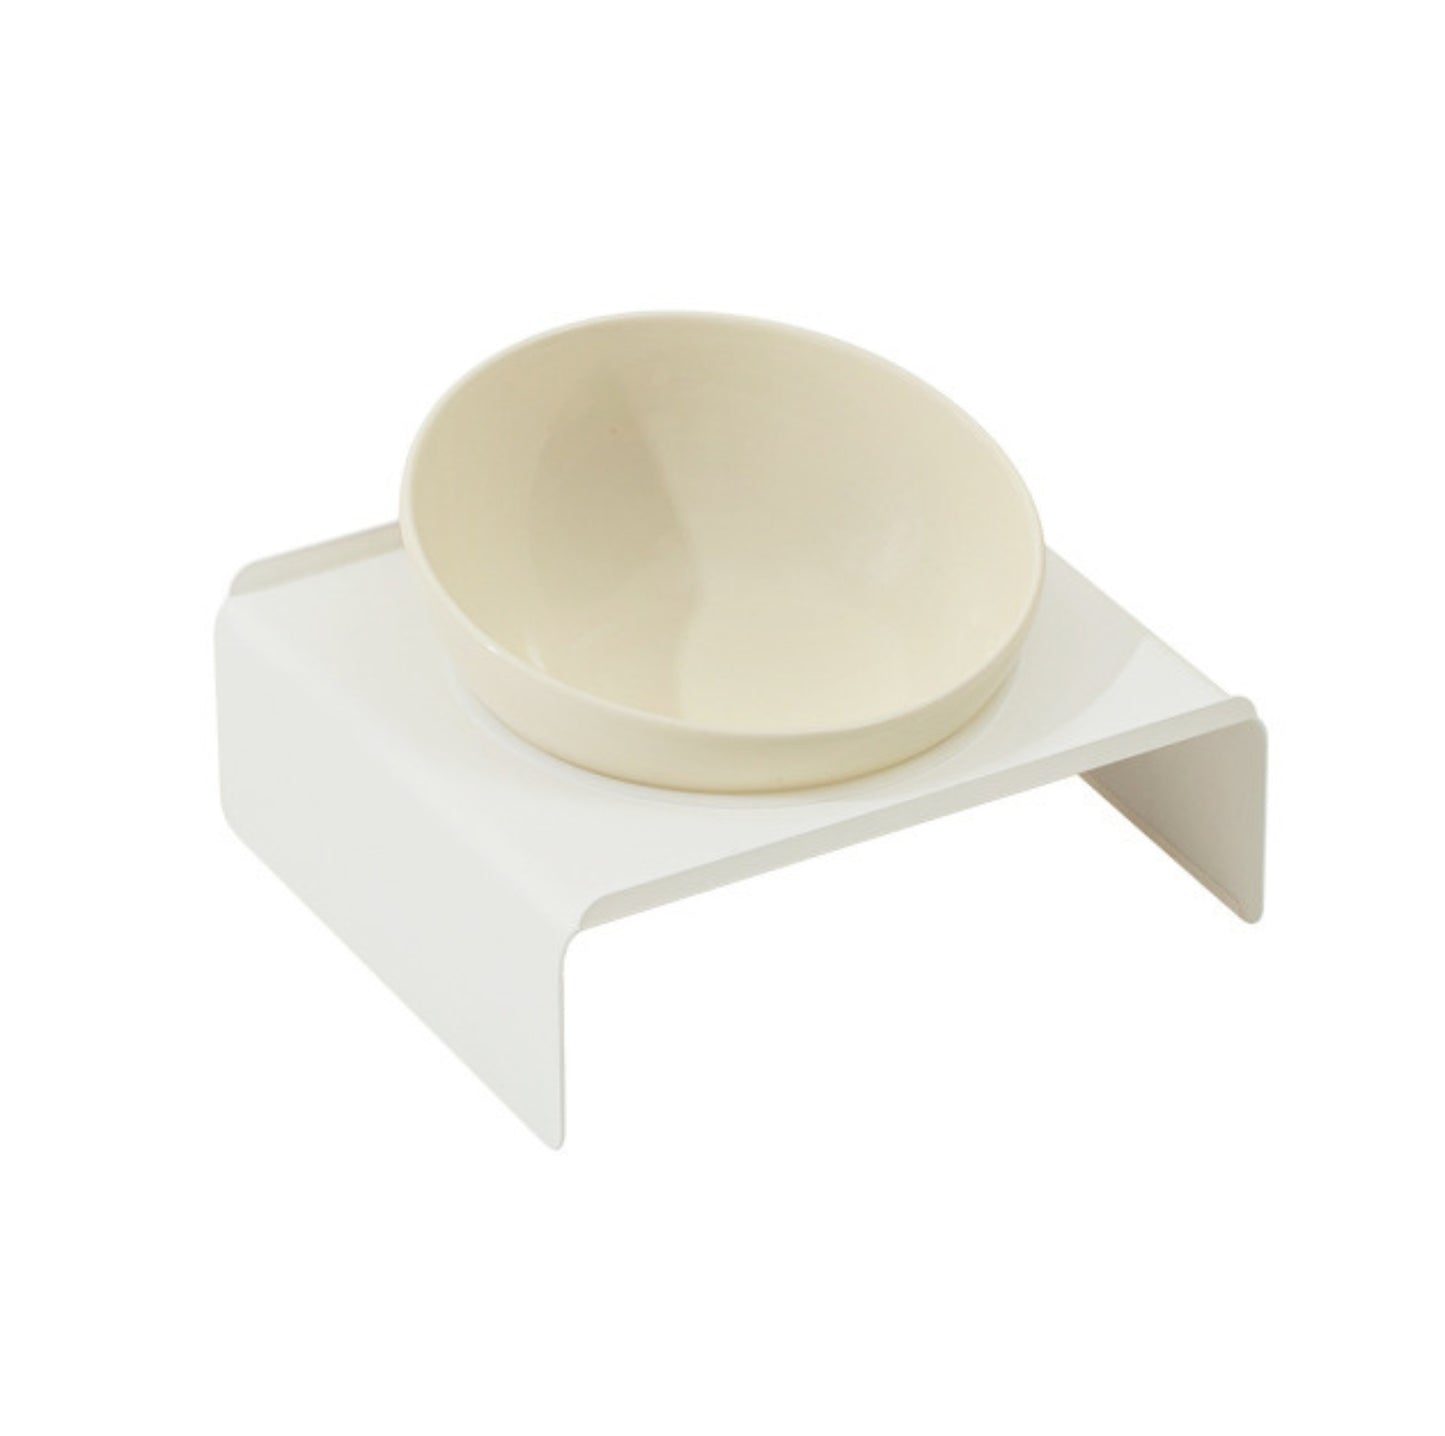 Adjustable Ceramic Pet Bowl with Arch Iron Stand